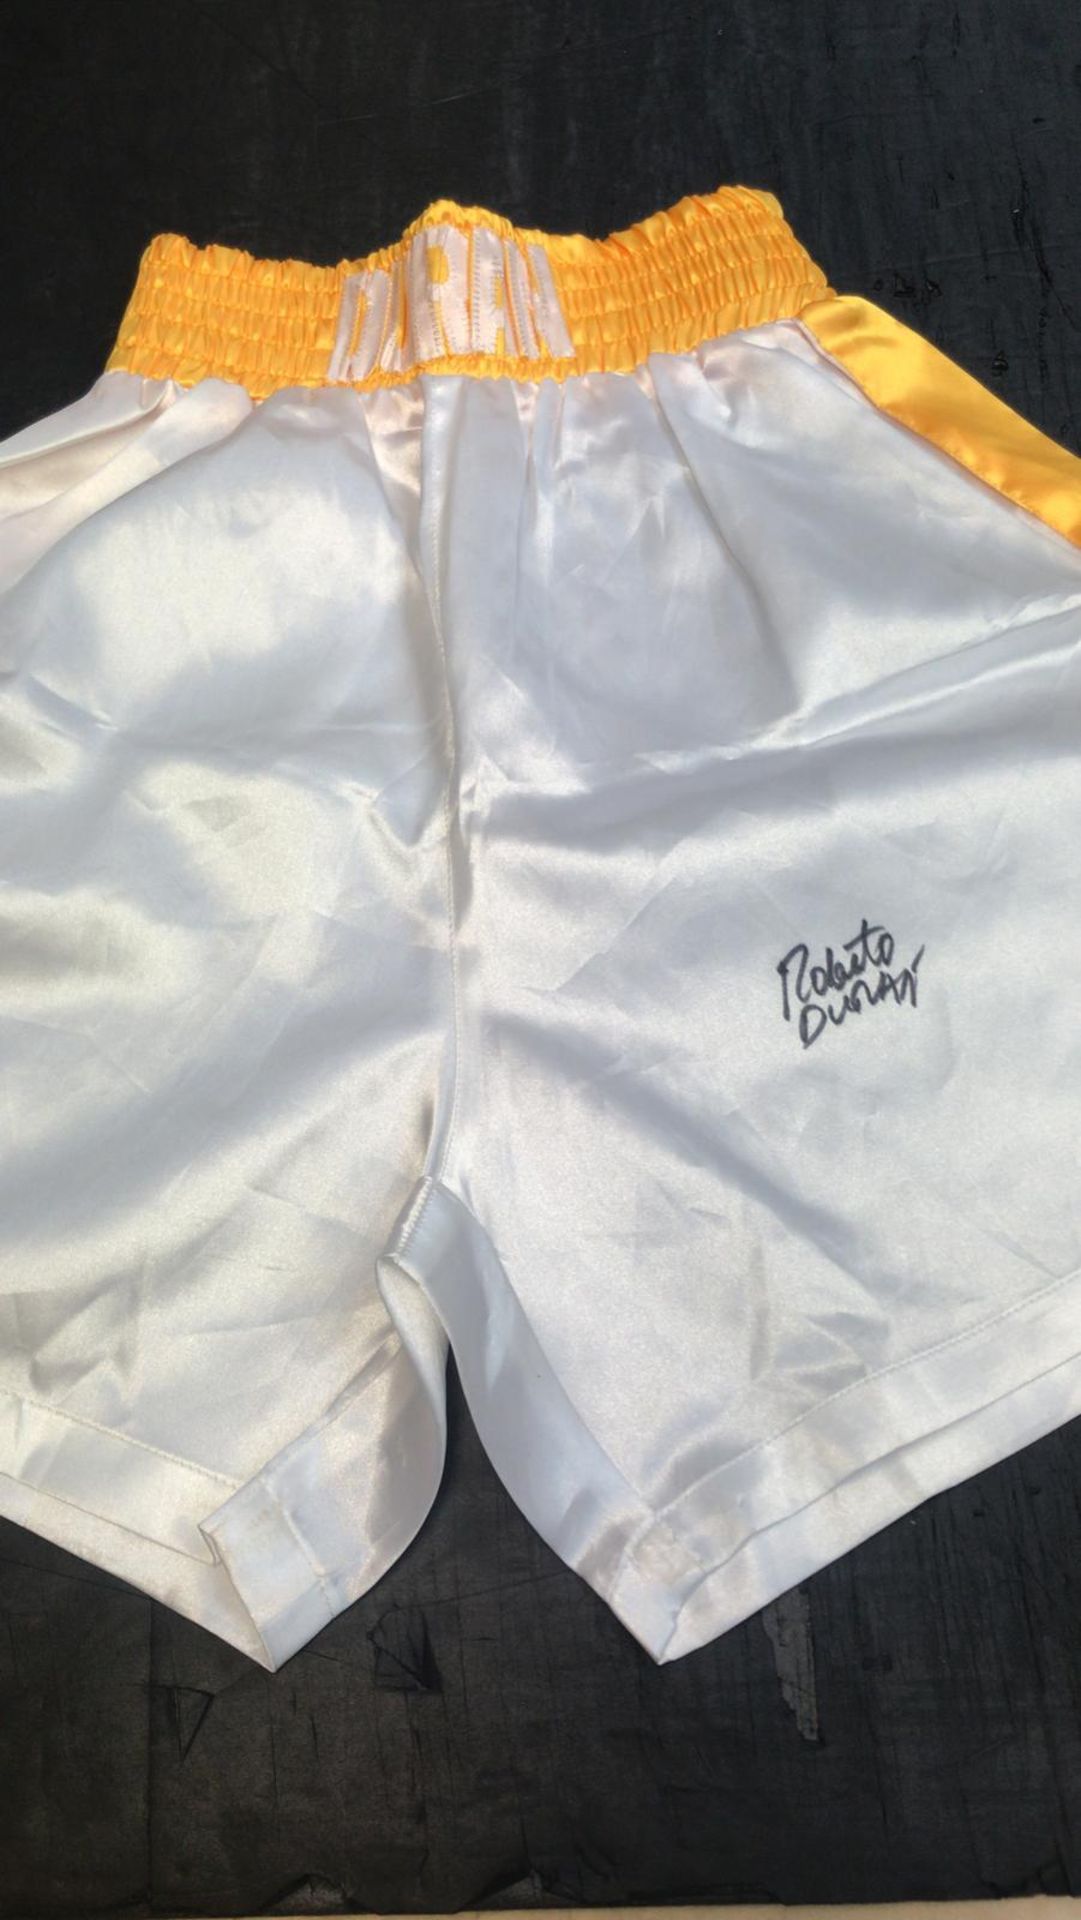 Roberto Duran Signed Boxing Shorts Supplied with Certificate Of Authenticity